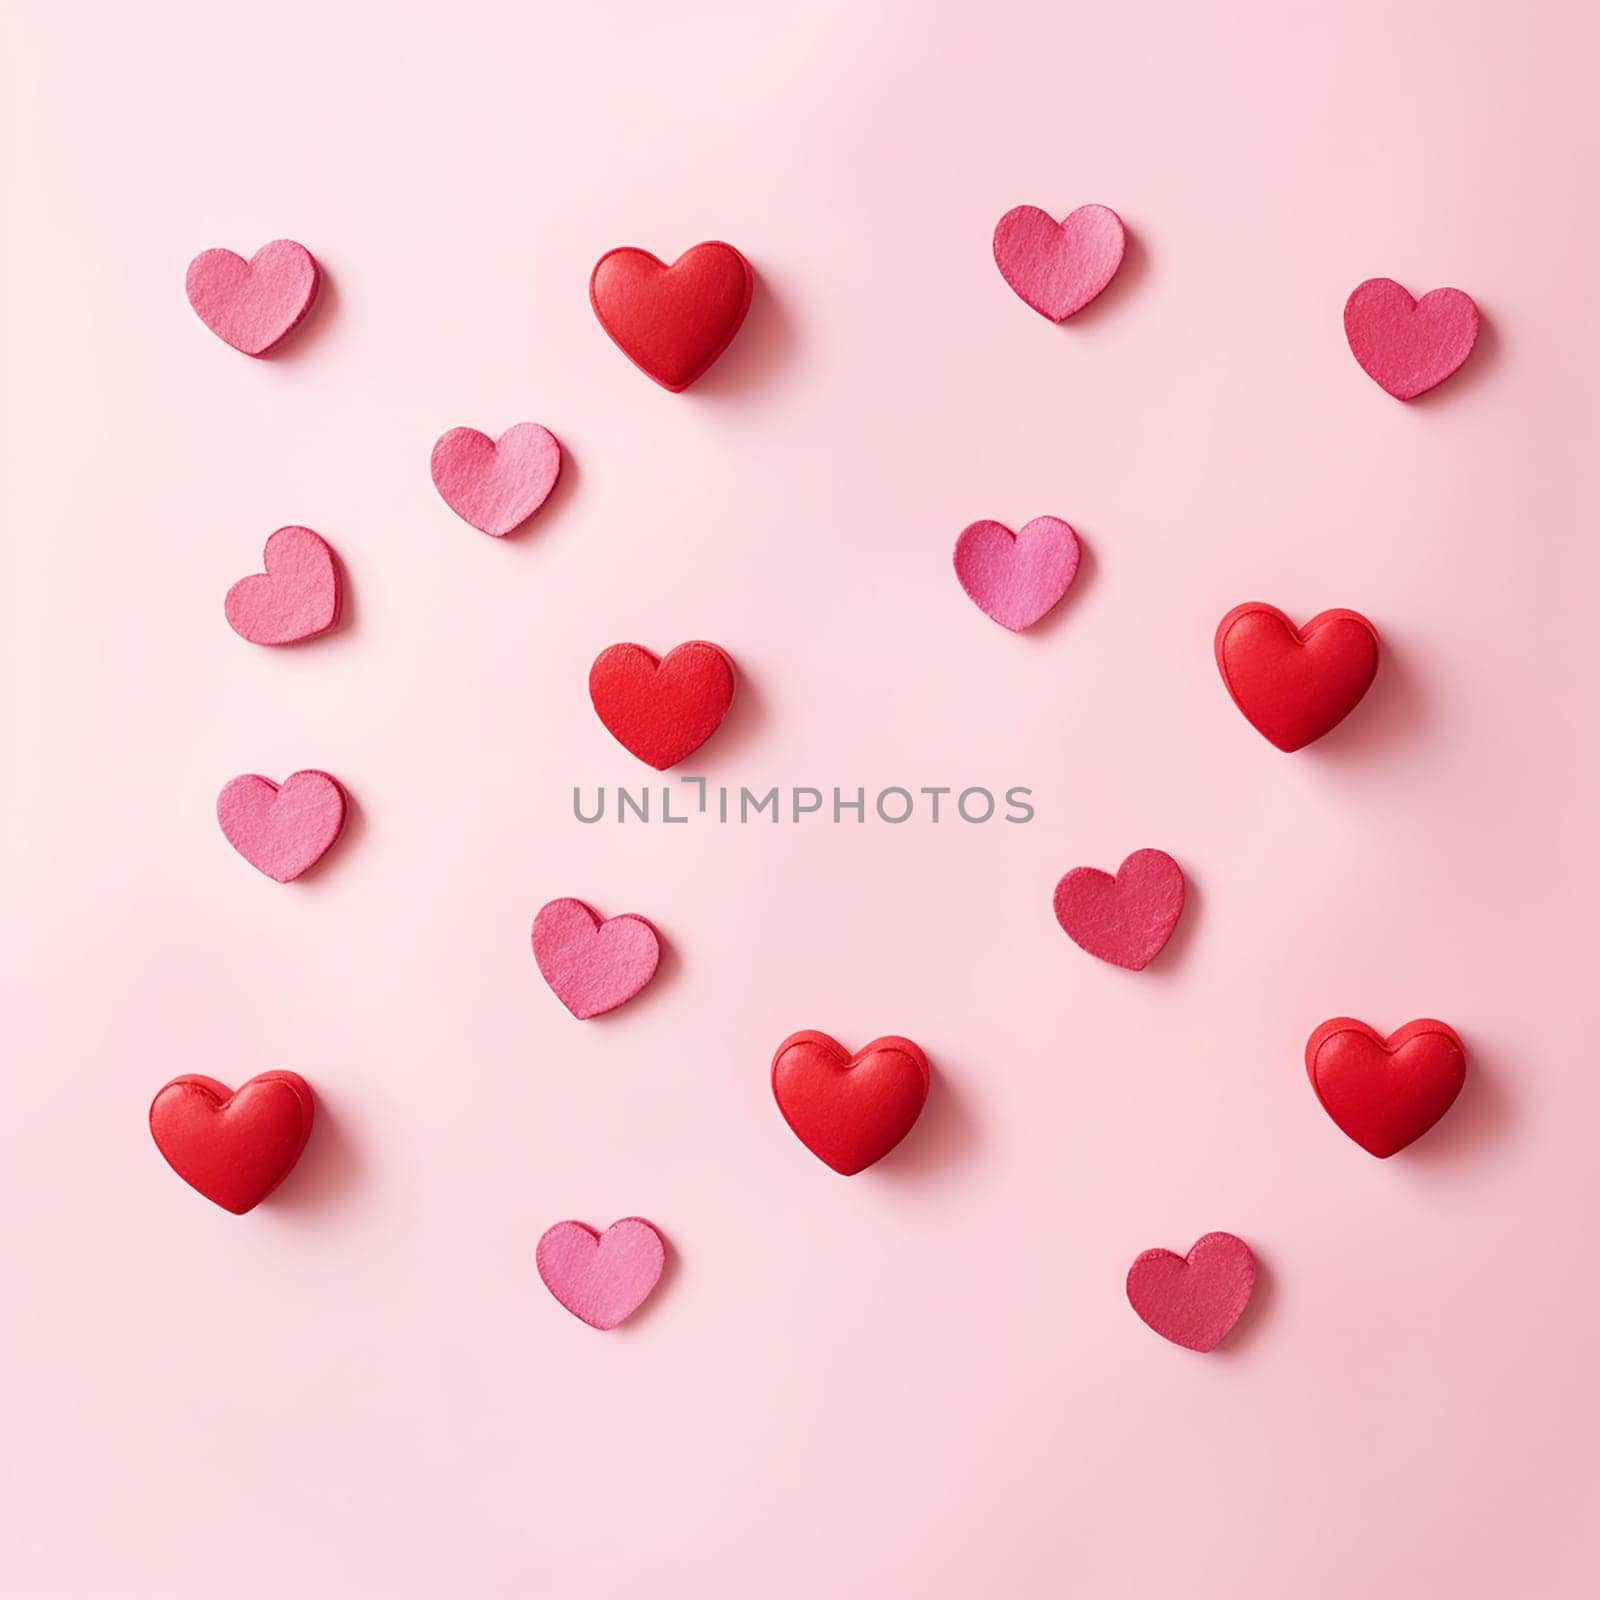 Assortment of pink and red hearts on a pastel background.